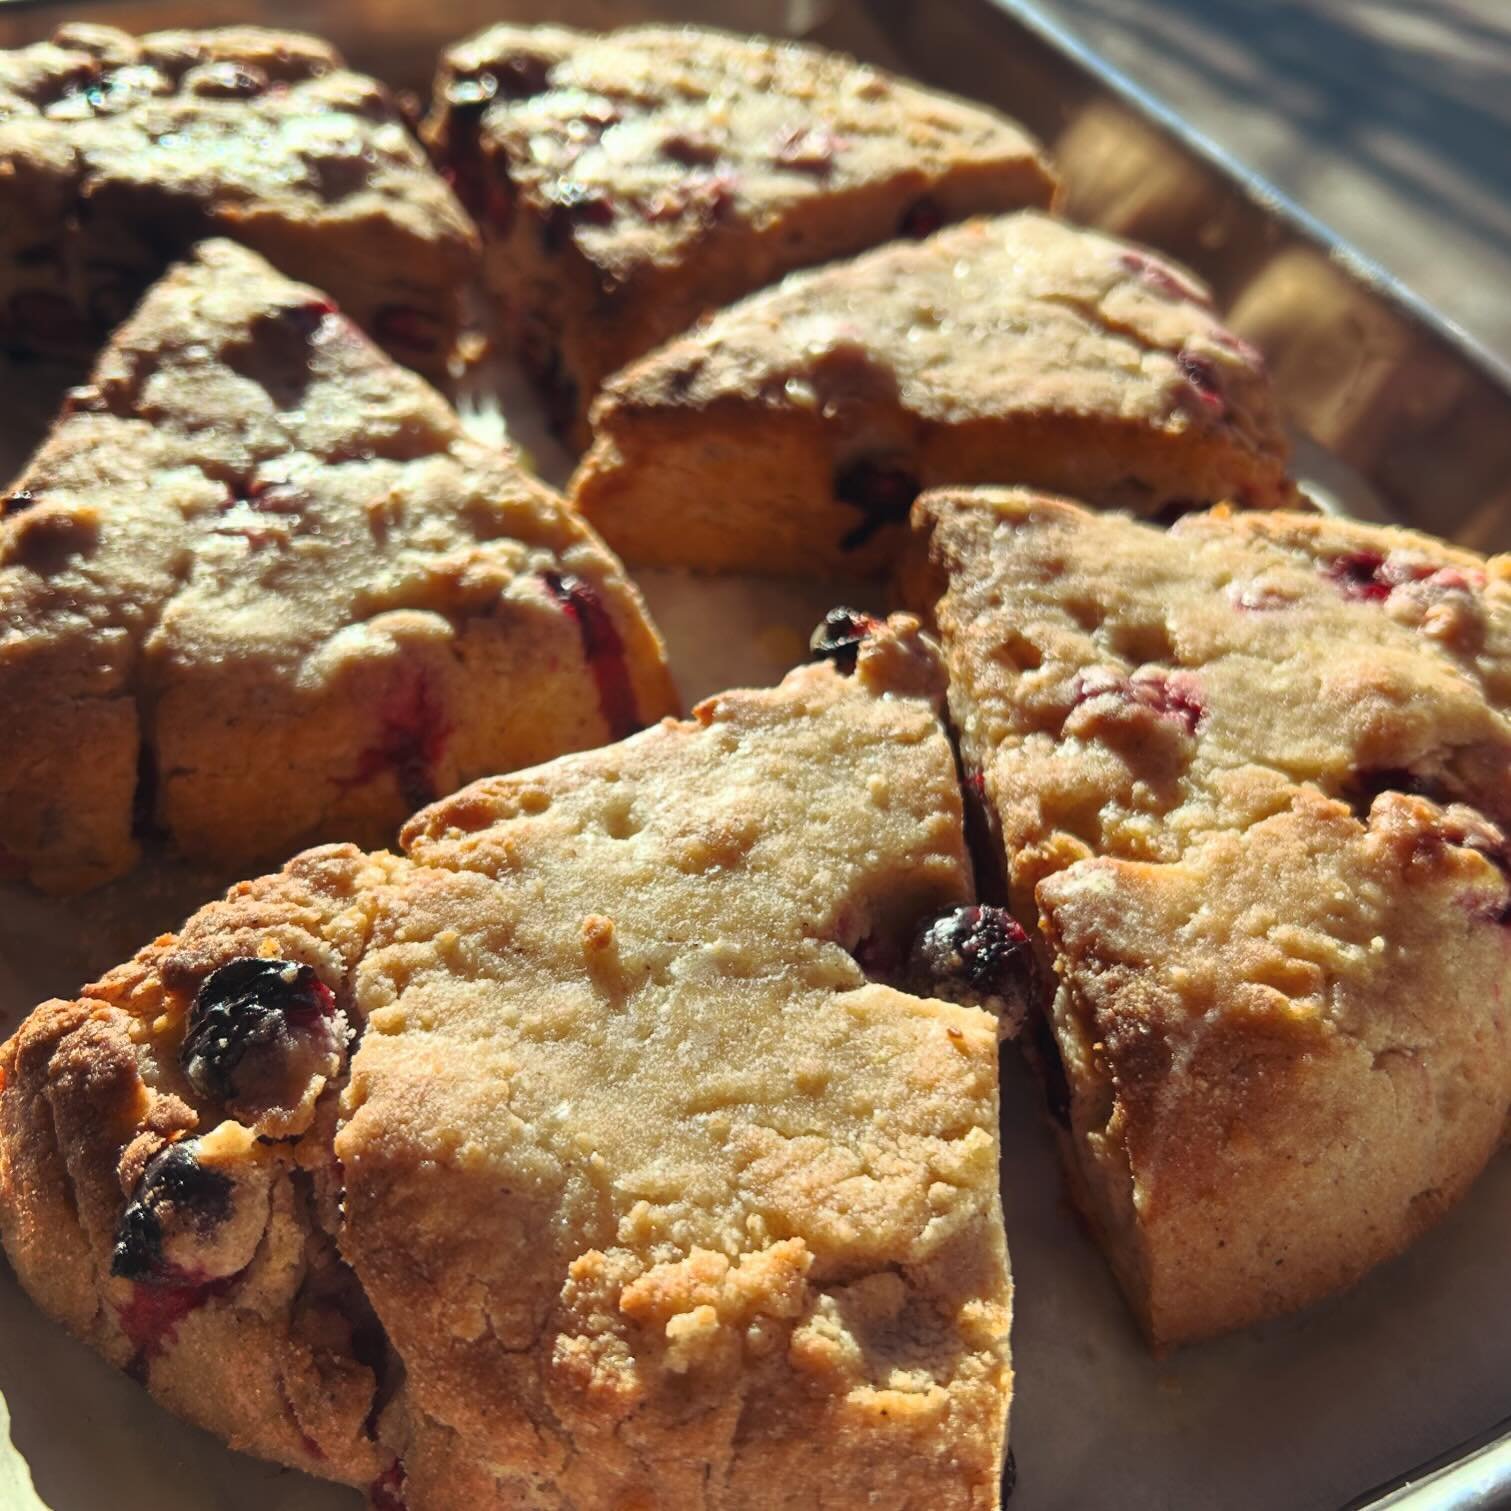 SUNDAY! Enter the Scone Zone! Cranberry Scones, fresh from the oven, and baked with @mainegrains flour and Maine-grown cranberries!
***
Breakfast 7-10:45 Lunch 11:30-3 ⏰ Dine-in or order takeout ☎️ 207-778-0288 🥡www.rootdownmarket.com